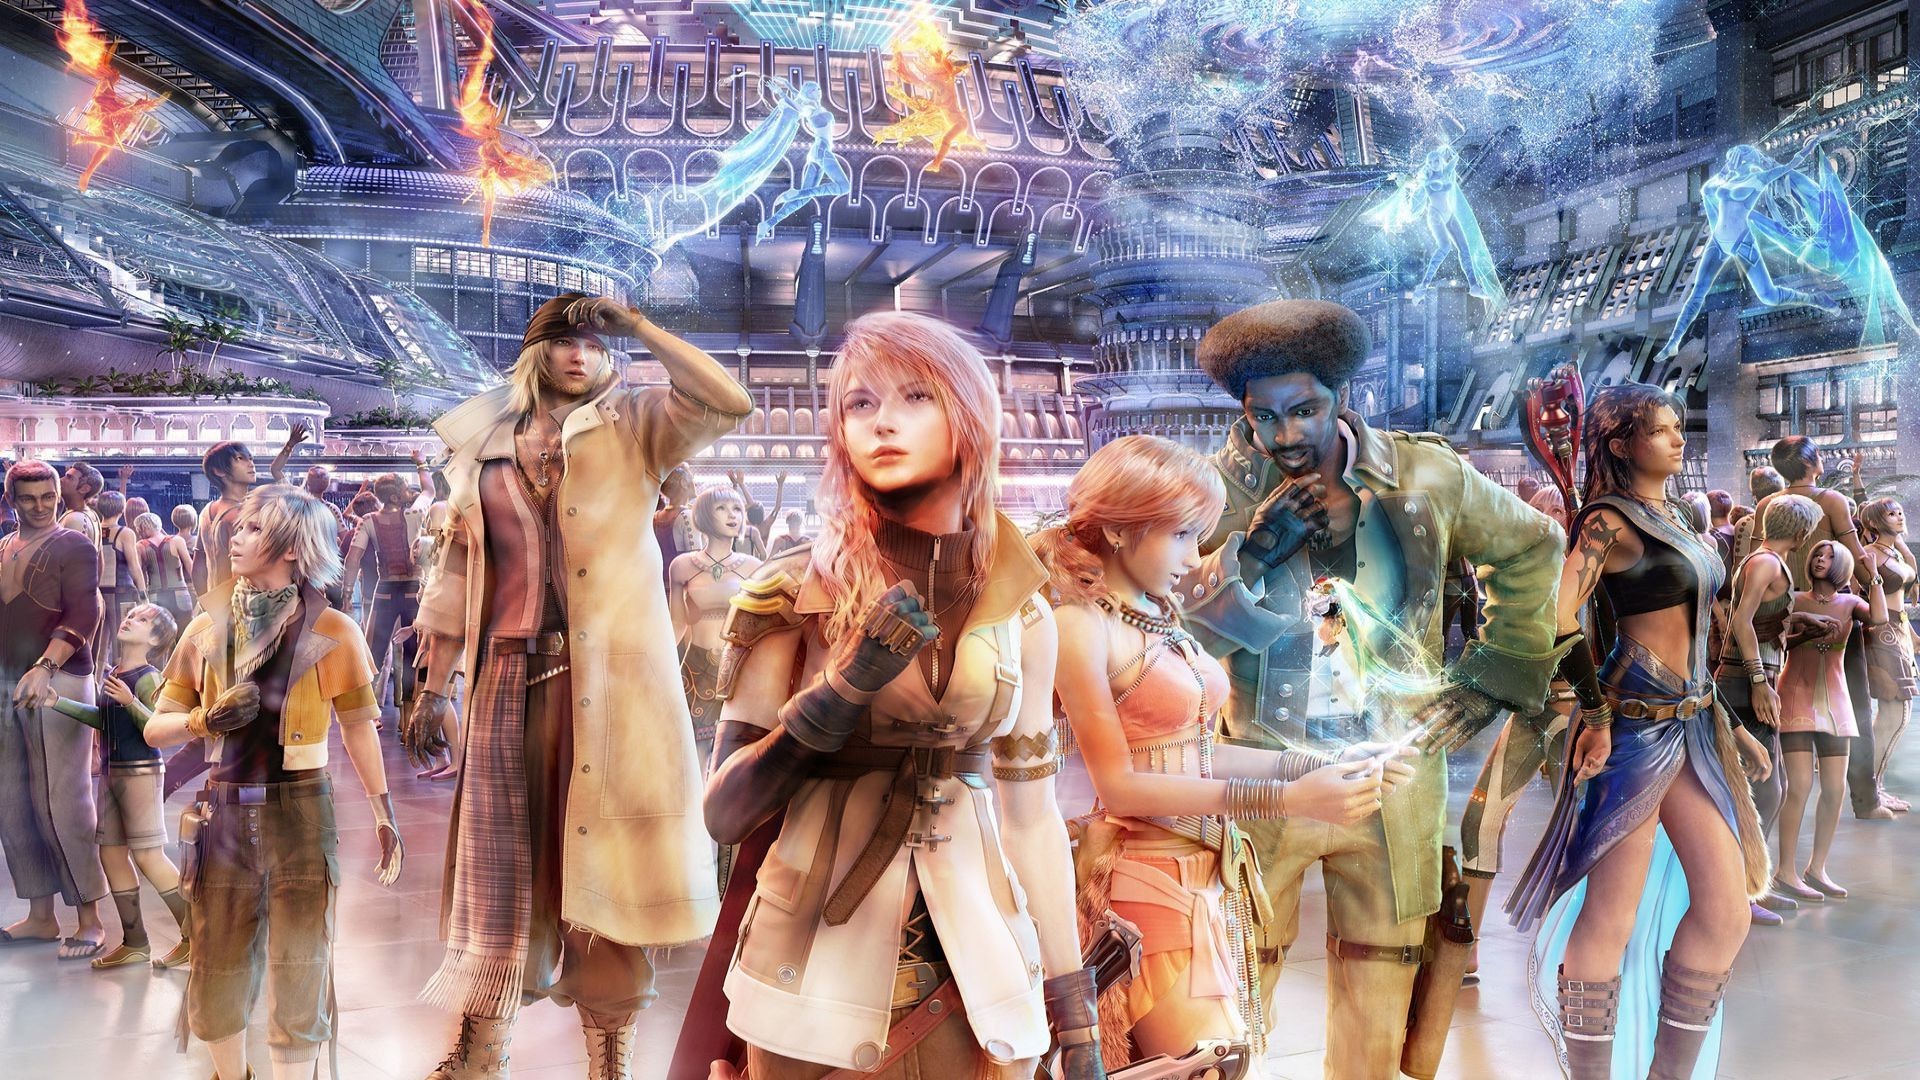 Free Download Final Fantasy Xiii Wallpaper 77 19x1080 For Your Desktop Mobile Tablet Explore 49 Final Fantasy 13 Backgrounds Final Fantasy 10 Wallpaper Final Fantasy Wallpapers